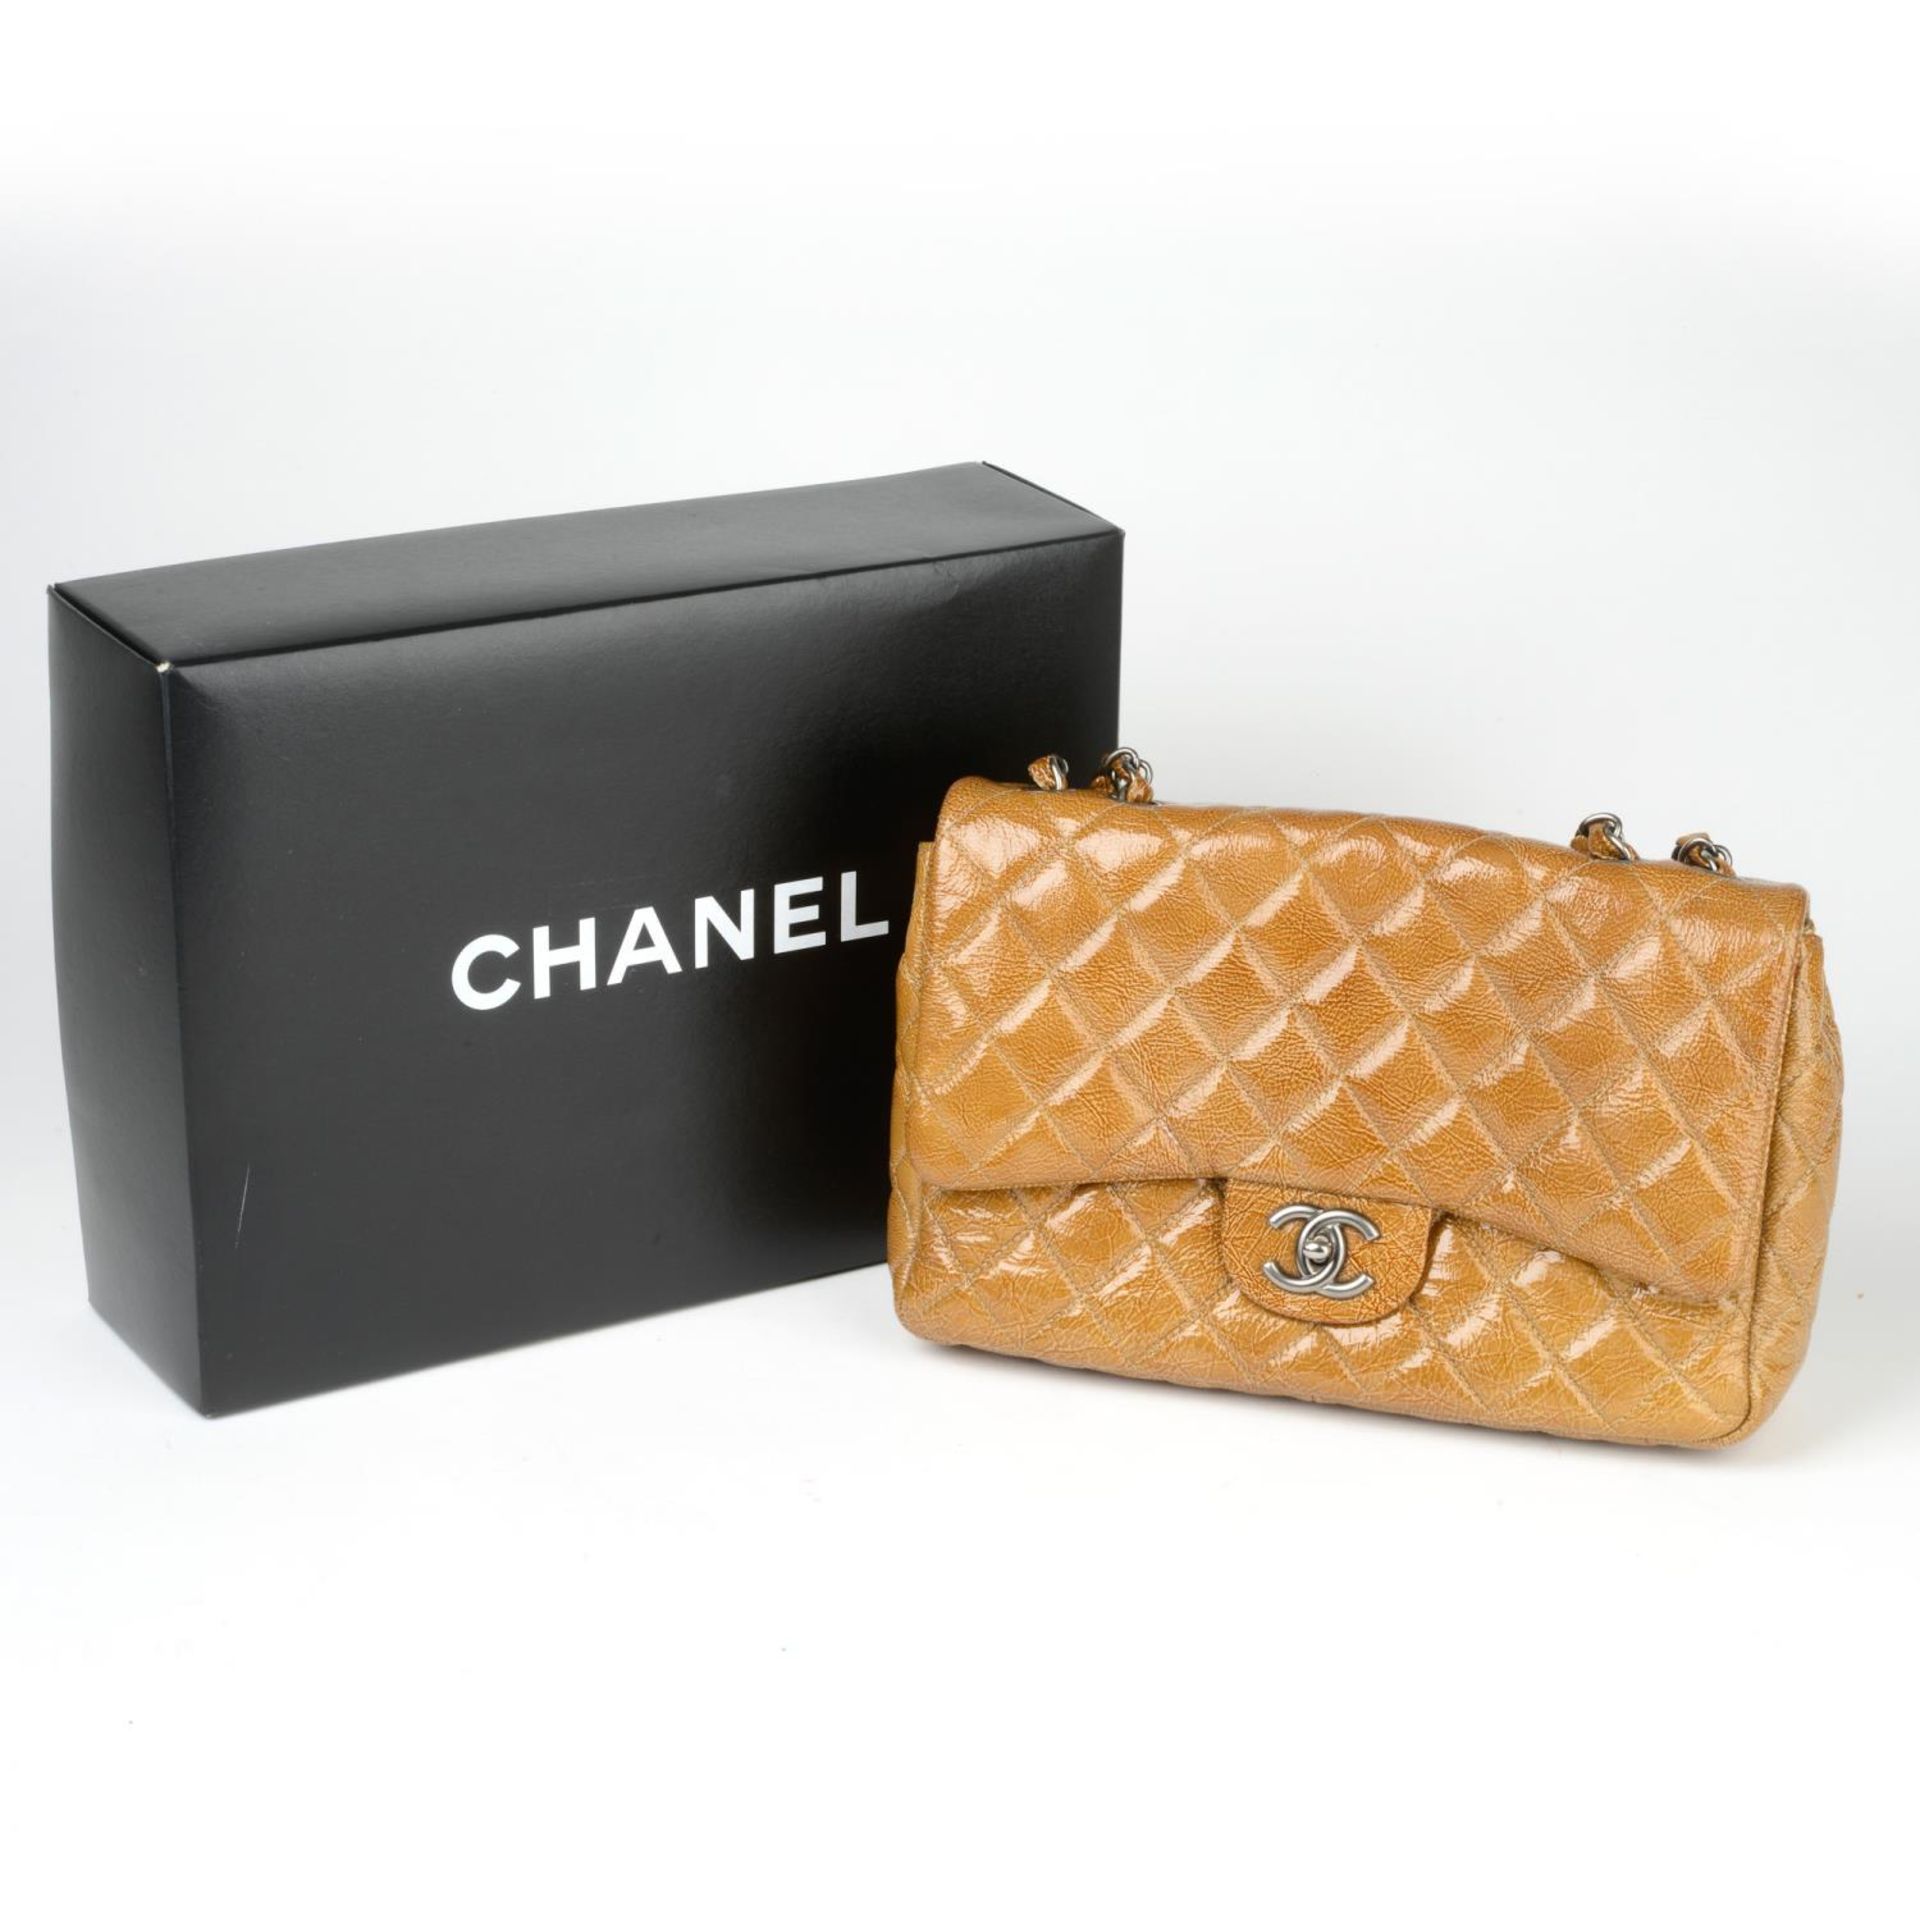 CHANEL - a crinkled patent leather Single Flap handbag. - Image 4 of 4